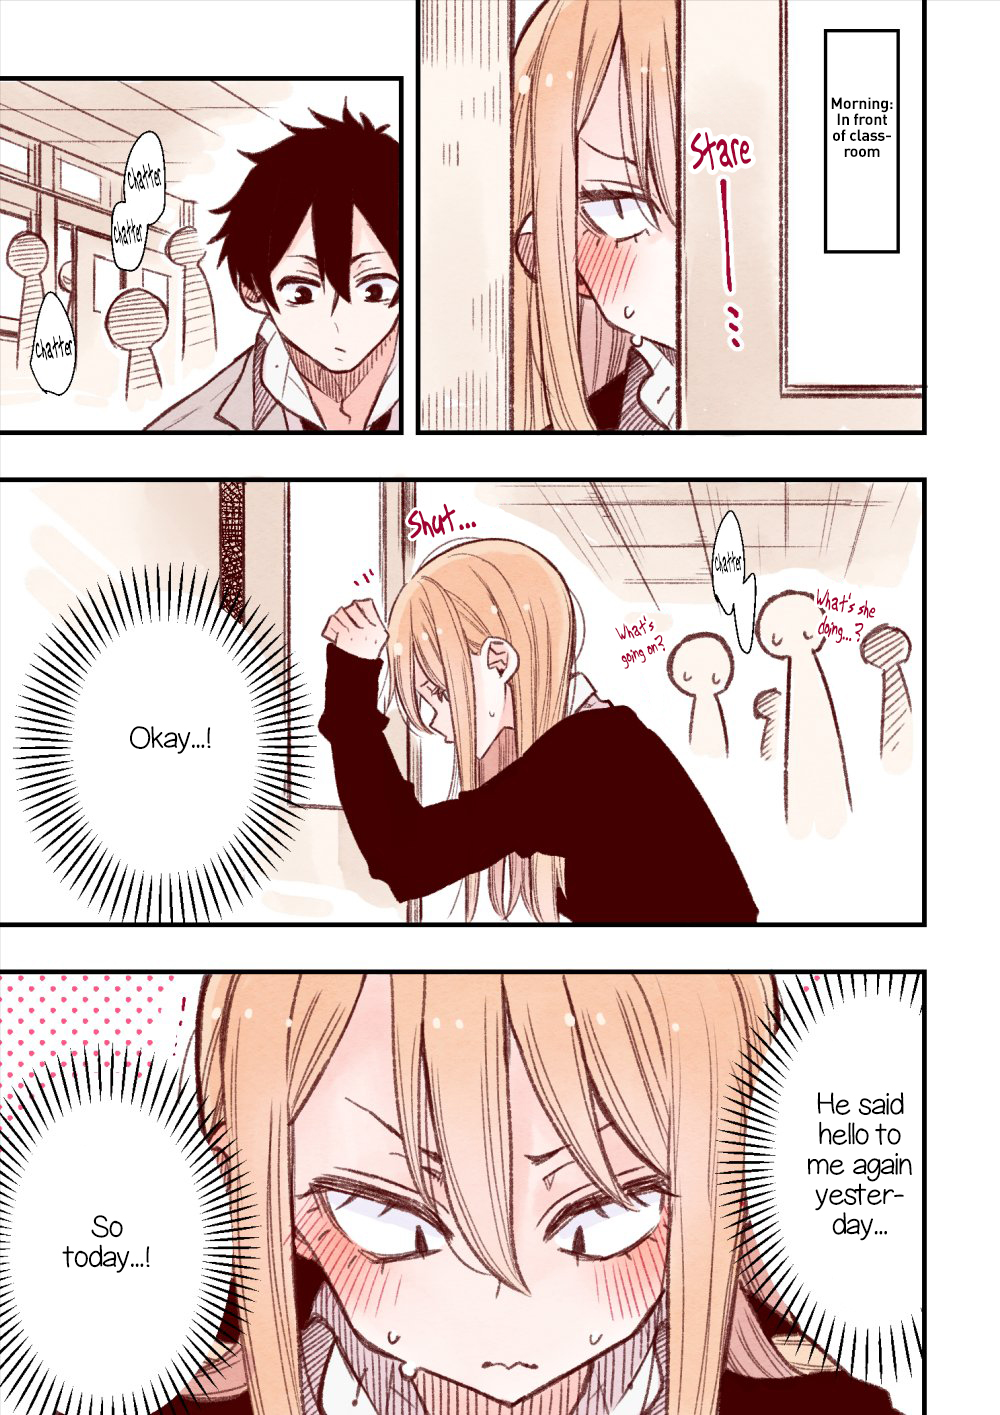 The Feelings of a Girl with Sanpaku Eyes Vol. 1 Ch. 2 The struggle to say hello